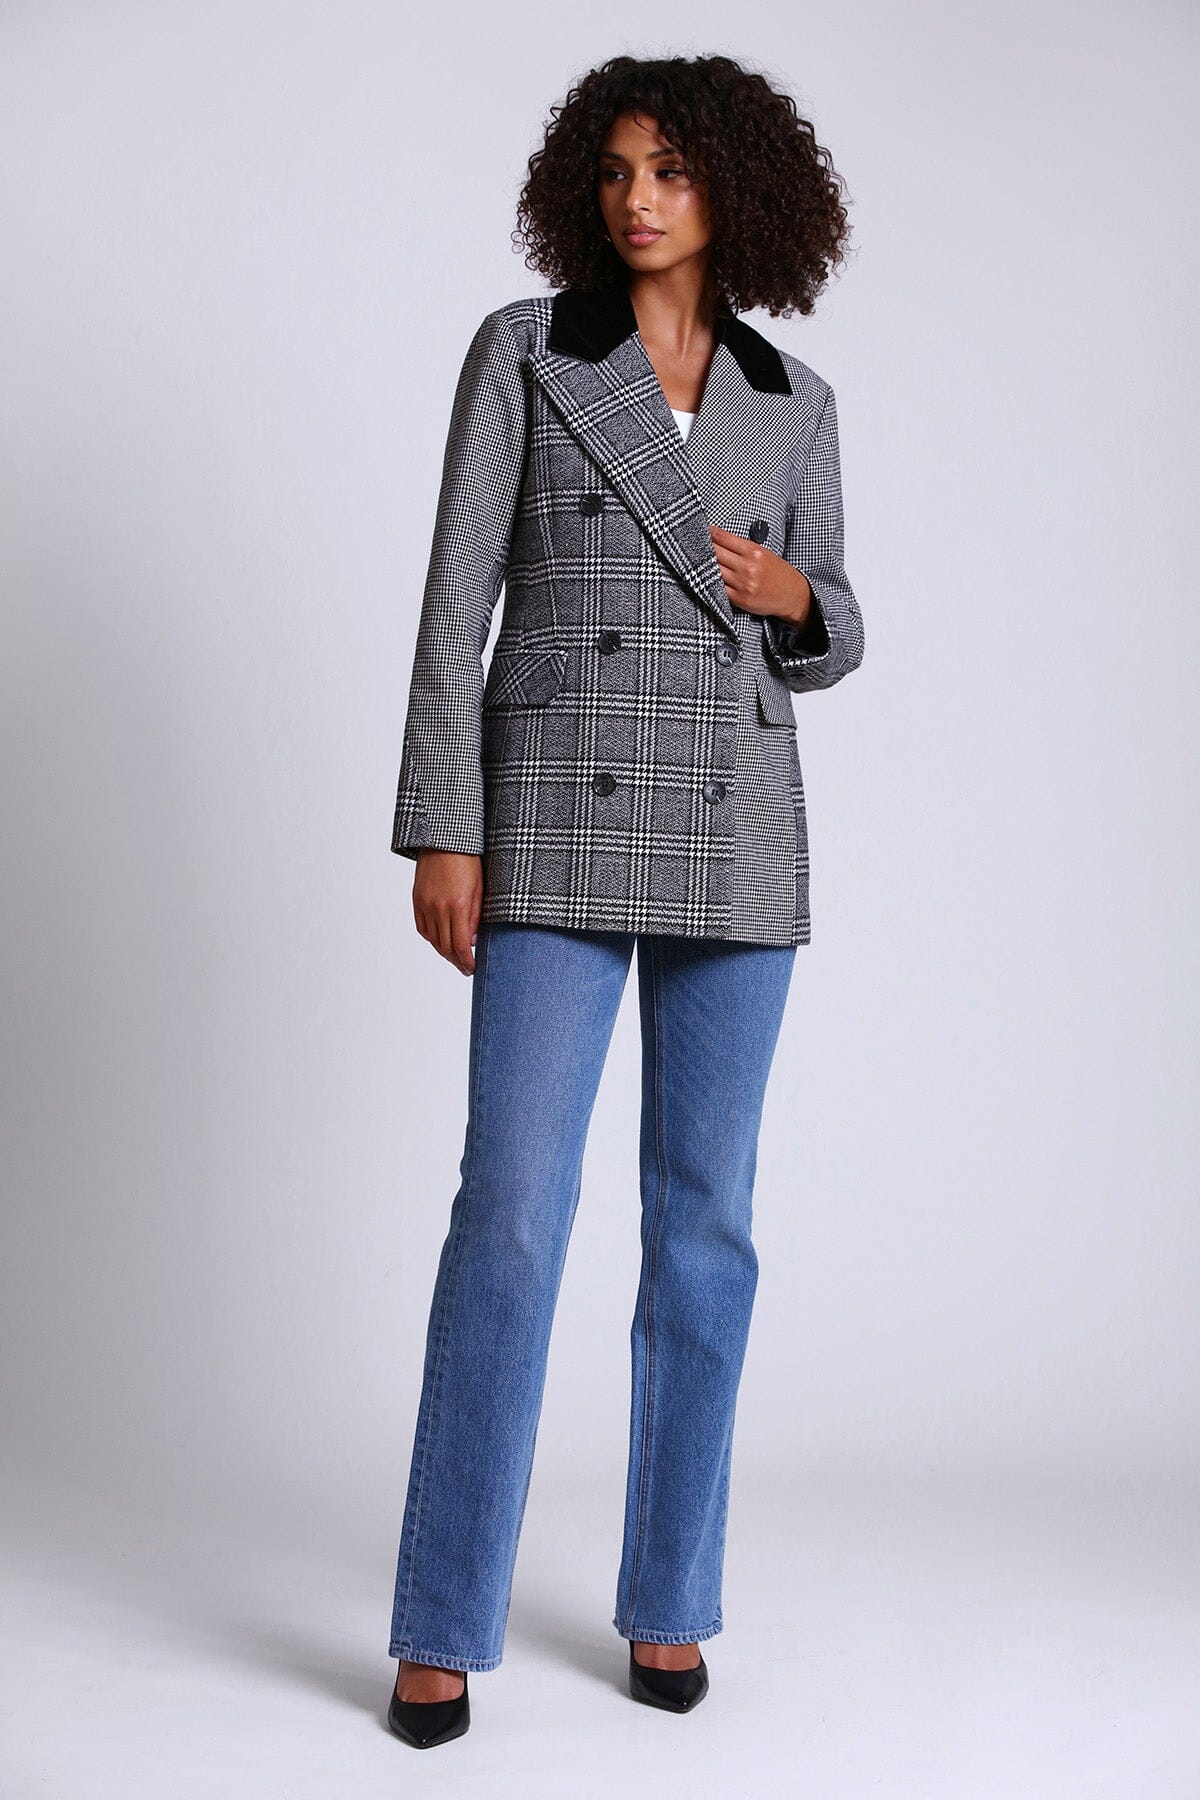 houndstooth mixed media plaid double breasted blazer coat jacket - women's figure flattering office to date night coats jackets blazers